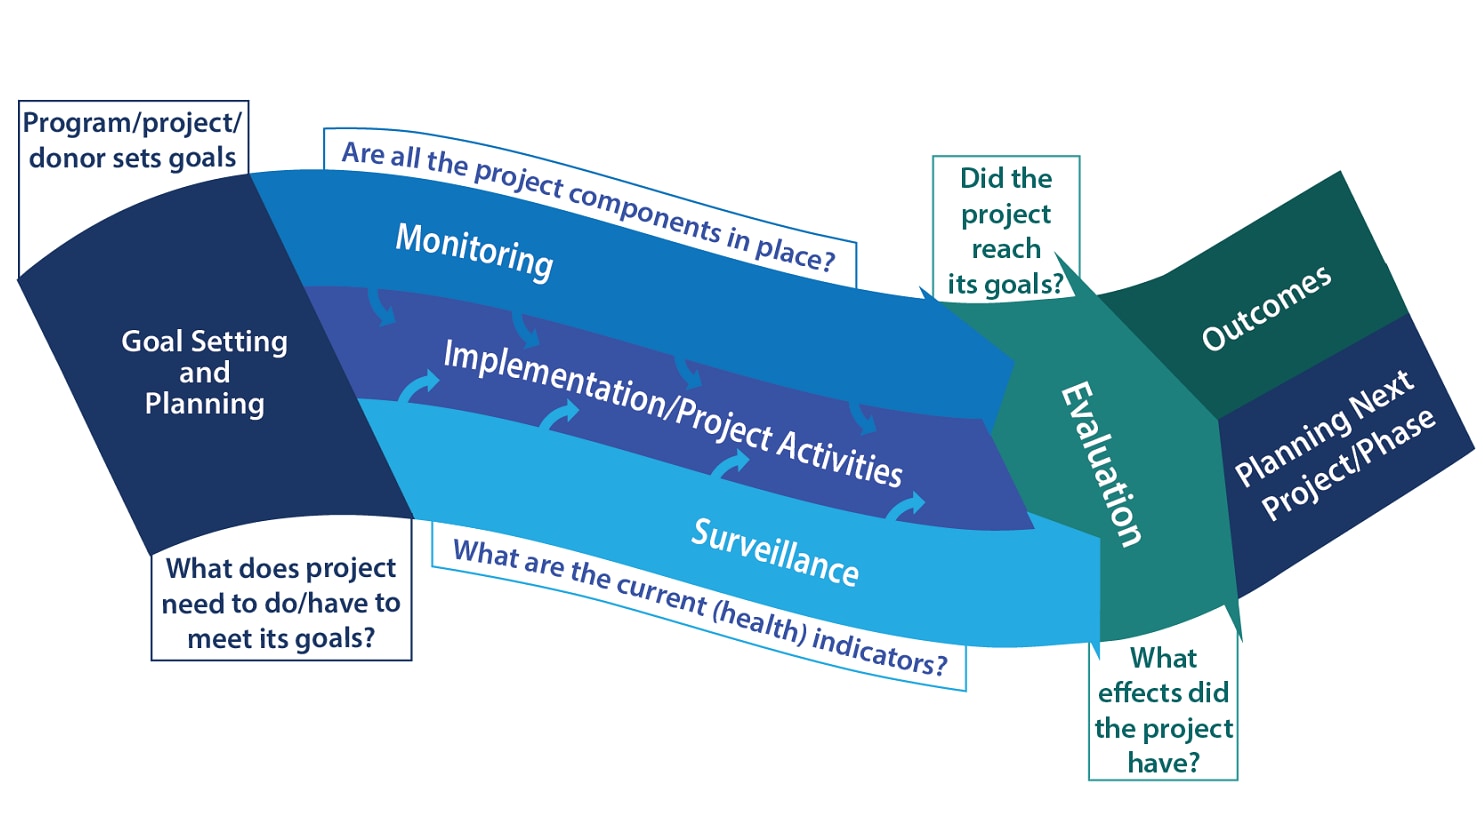 Illustration showing a curve that progresses through stages: 1st stage is goal setting and planning. Goals are set, associated with, “What does Project need to do or have to meet its goals?” 2nd stage has 3 subsections: (1) Monitoring, associated with, “Are all project components in place?” (2) Surveillance, associated with, “What are current health indicators?” (3) Implementation/Project Activities where both 1 and 2 feed into this subsection. 3rd stage is evaluation, associated with, “Did the Project reach its goals?” and “What effects did the Project have?” 4th stage has 2 sections: Outcomes, and Planning the Next Project/Phase.